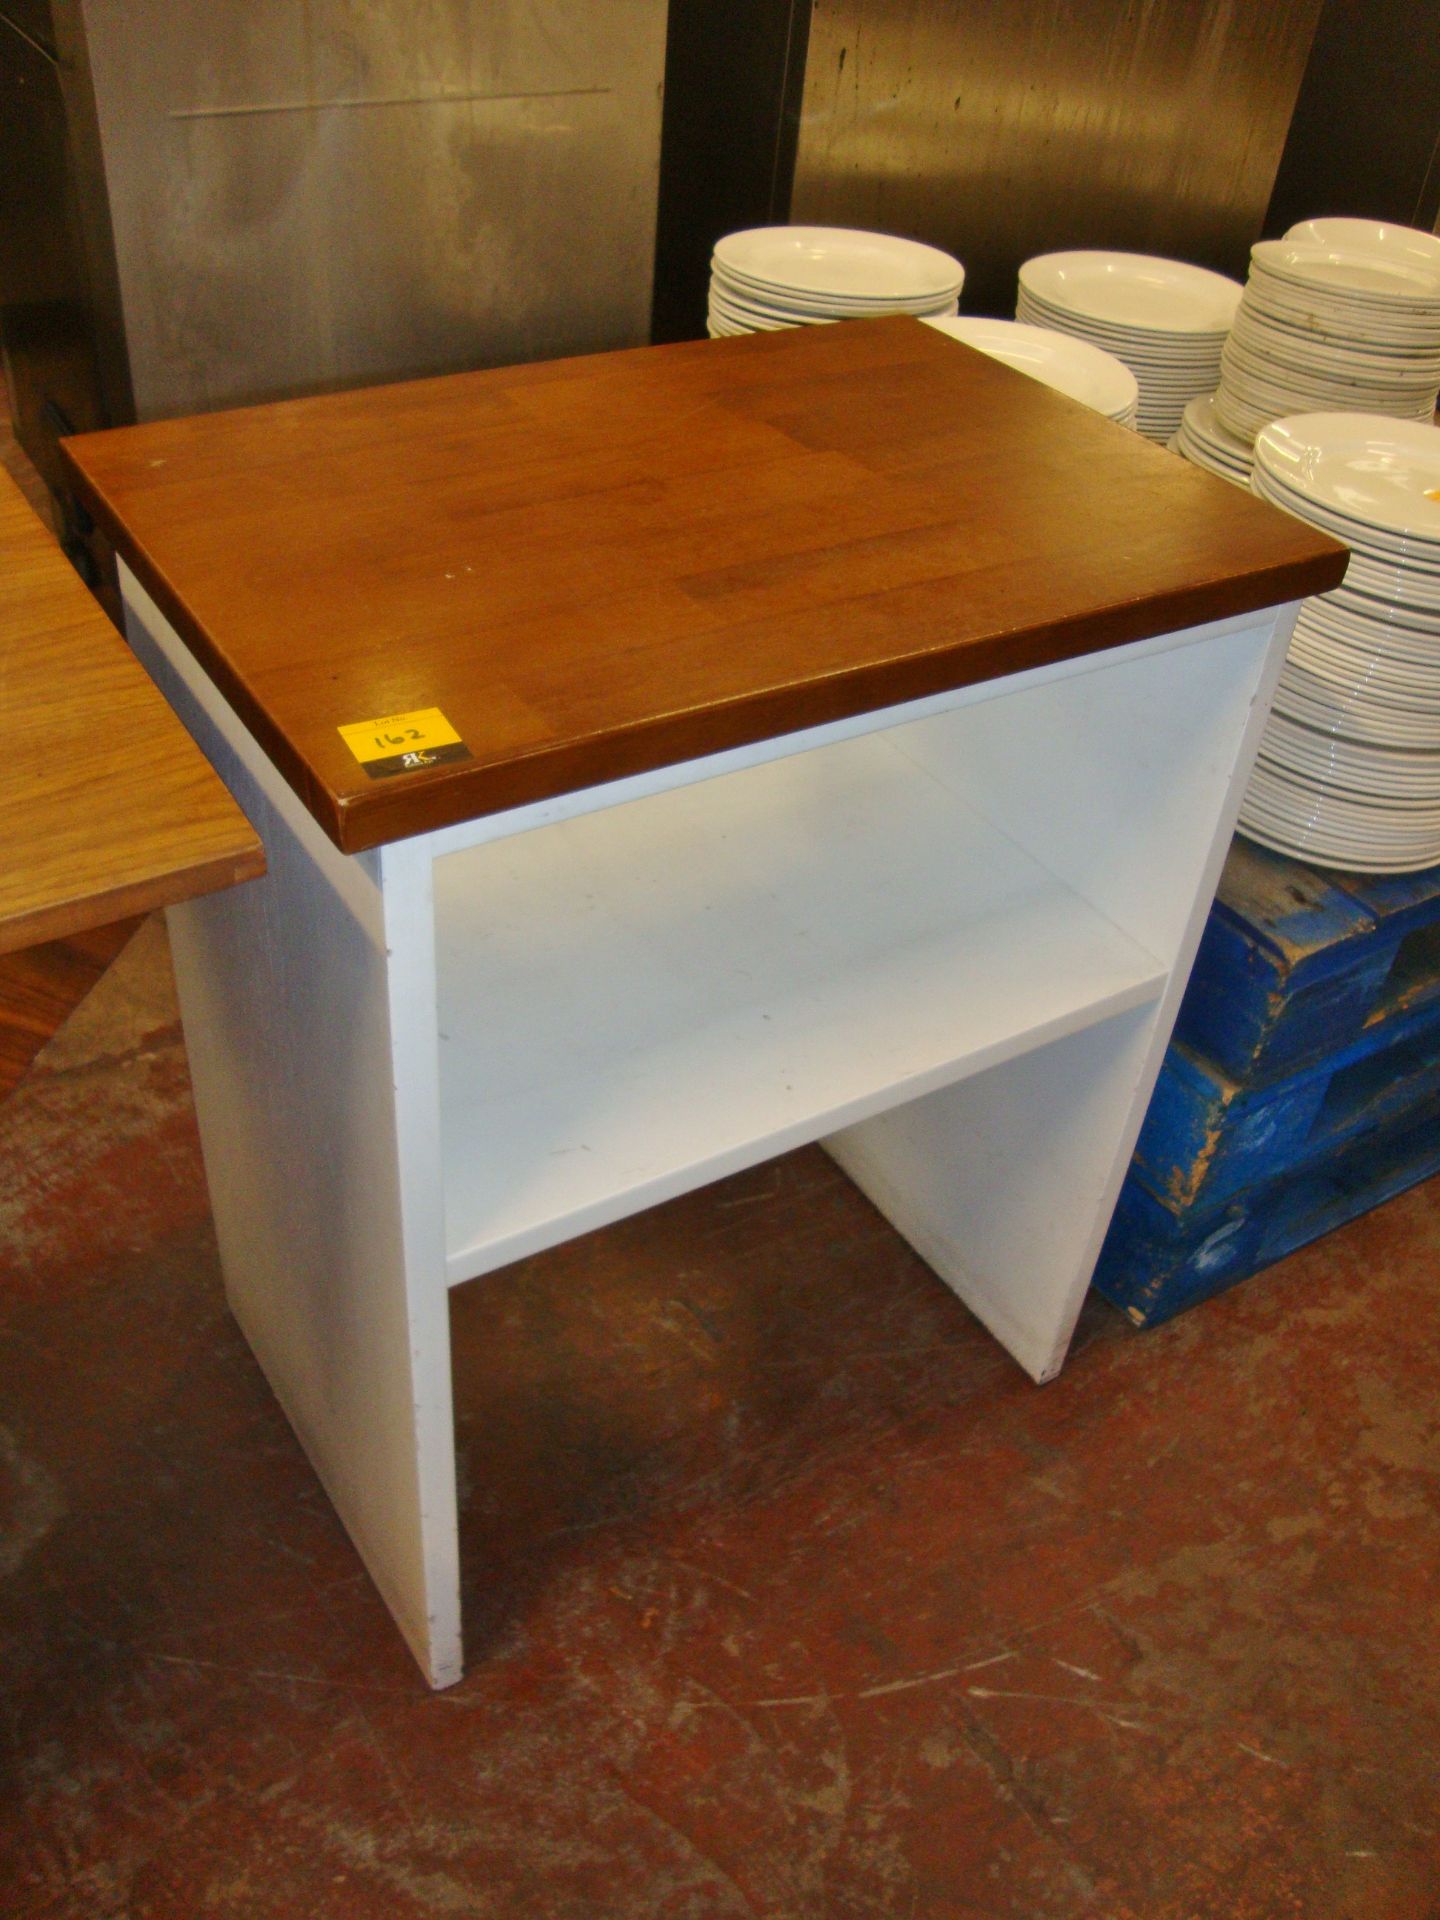 White & brown wooden serving table, max dimensions circa 27" x 19"